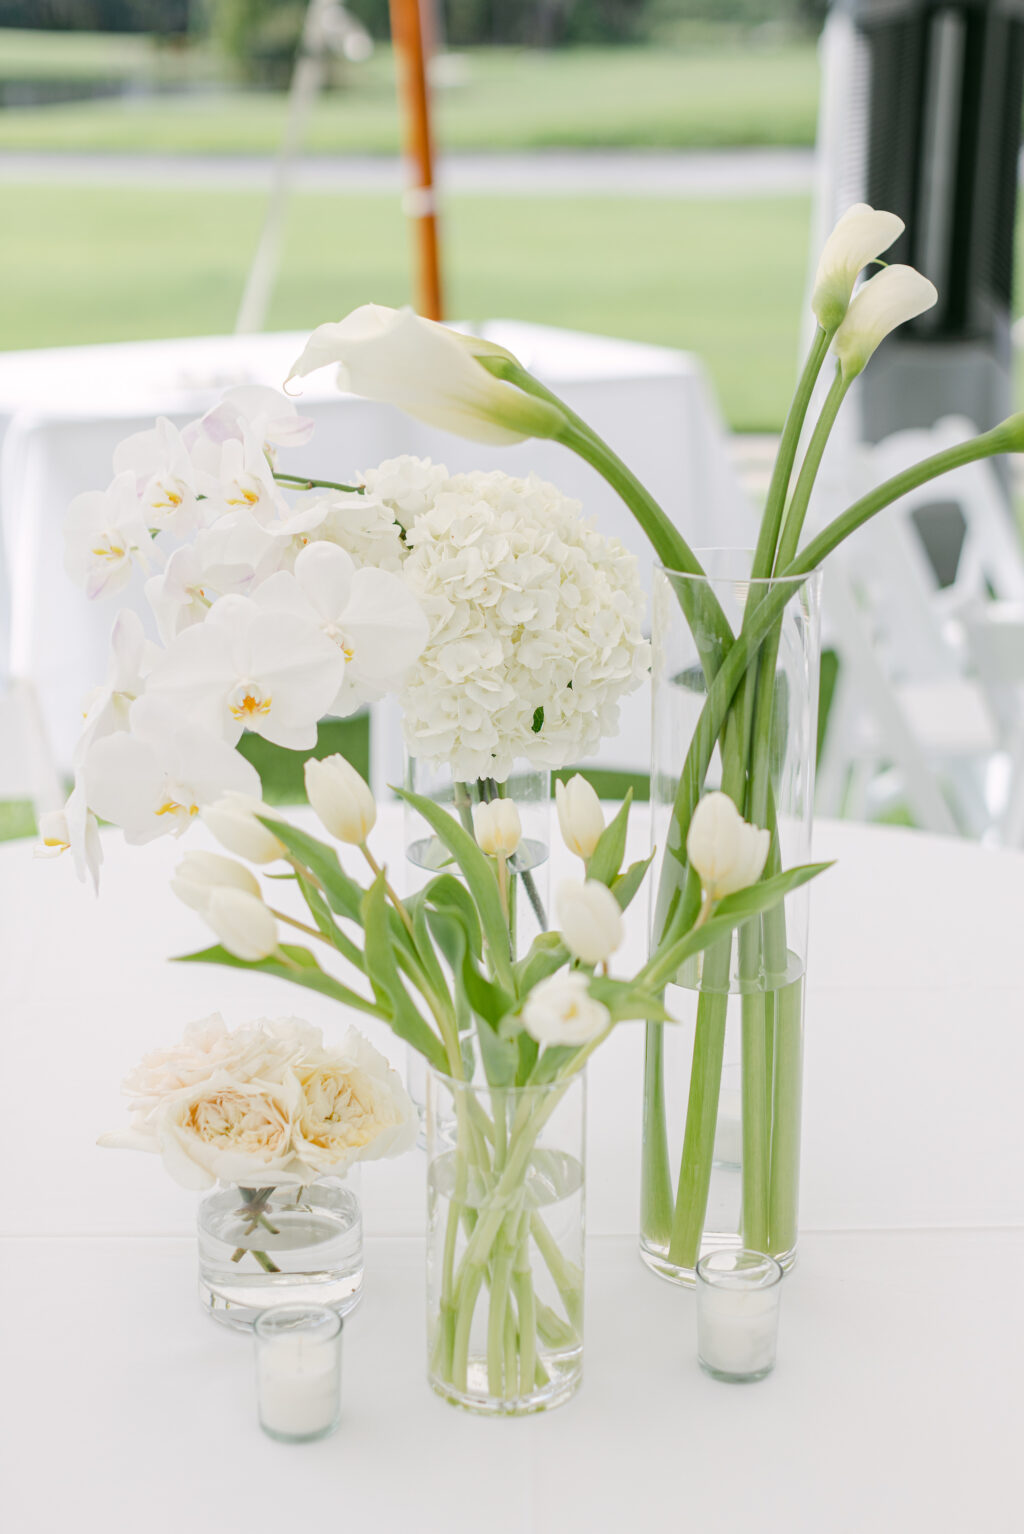 Classic White Calla Lilly, Garden Roses, Hydrangeas, Tulips, and Orchid Centerpieces | Garden Wedding Inspiration